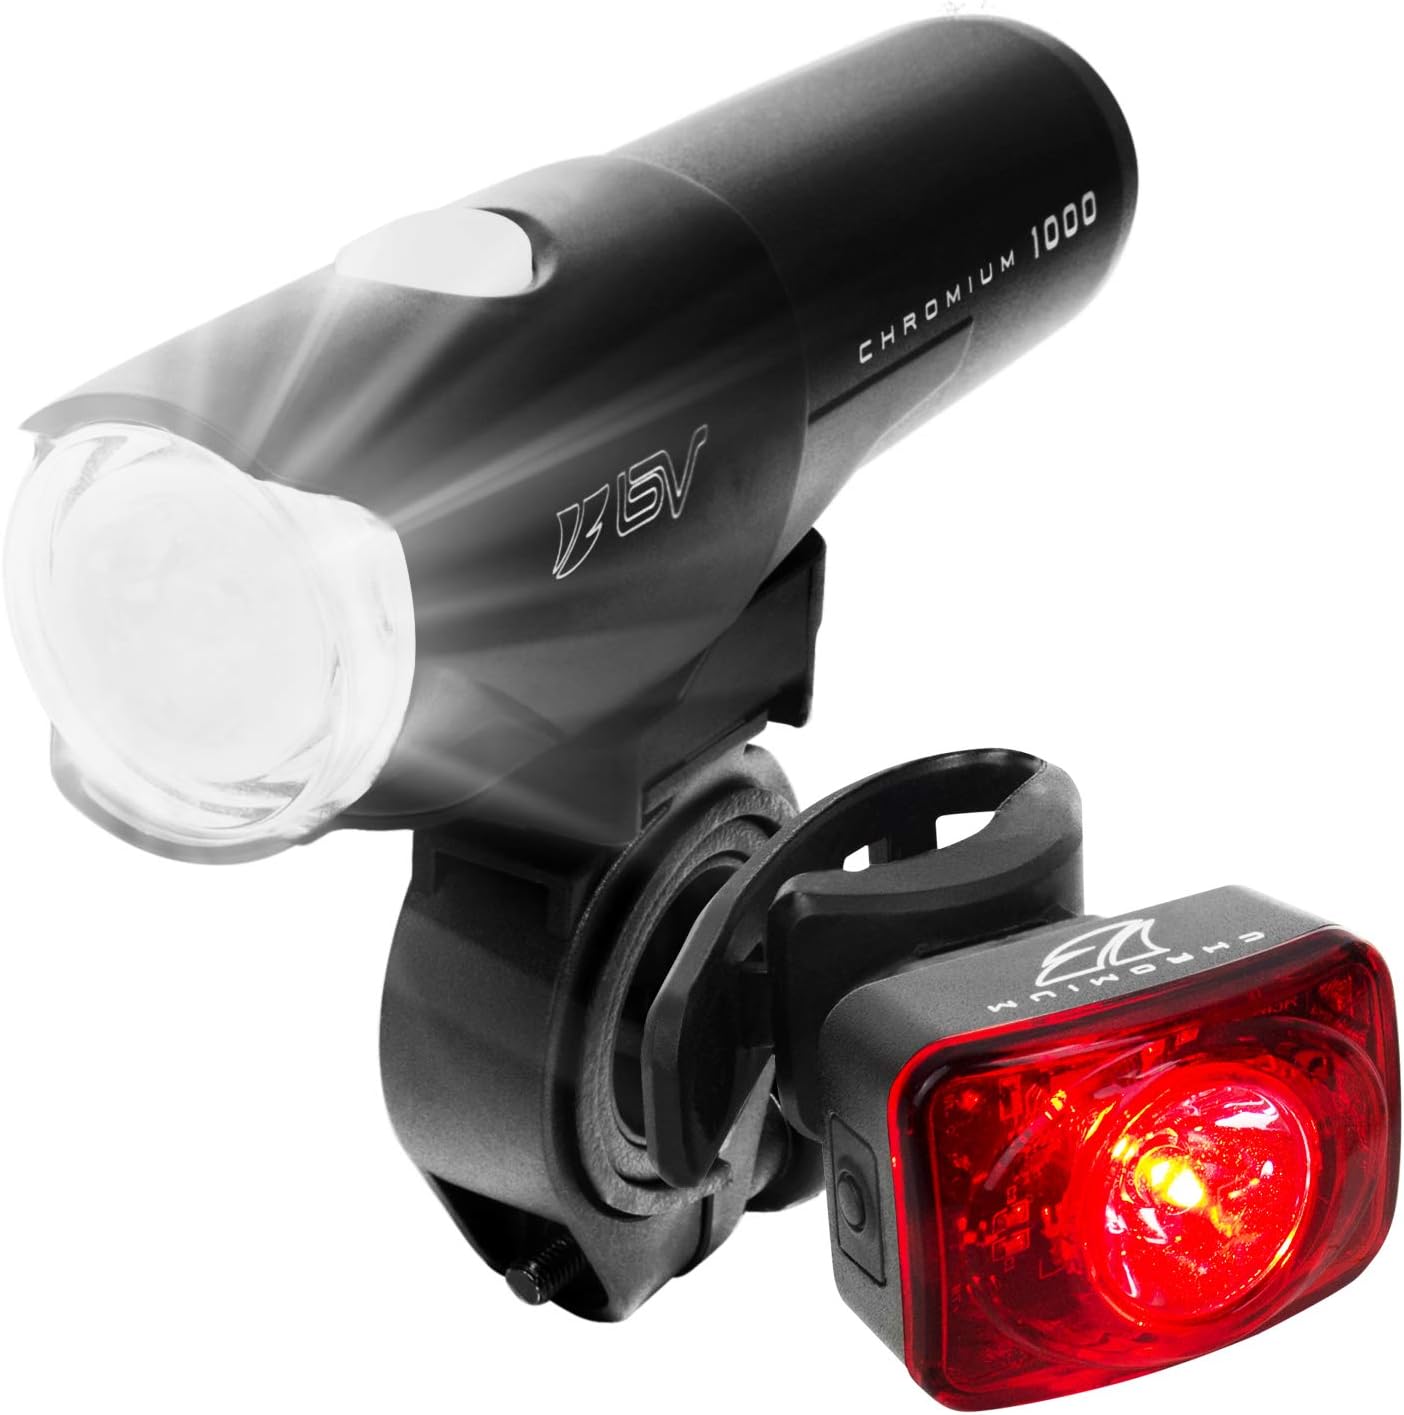 Bike Lights, Super Bright with 5 LED Bike Headlight & 3 LED Rear, Bike Lights for Night Riding with Quick-Release, Waterproof Bicycle Light Set, Bike Accessories, Bicycle Accessories, Flashlight